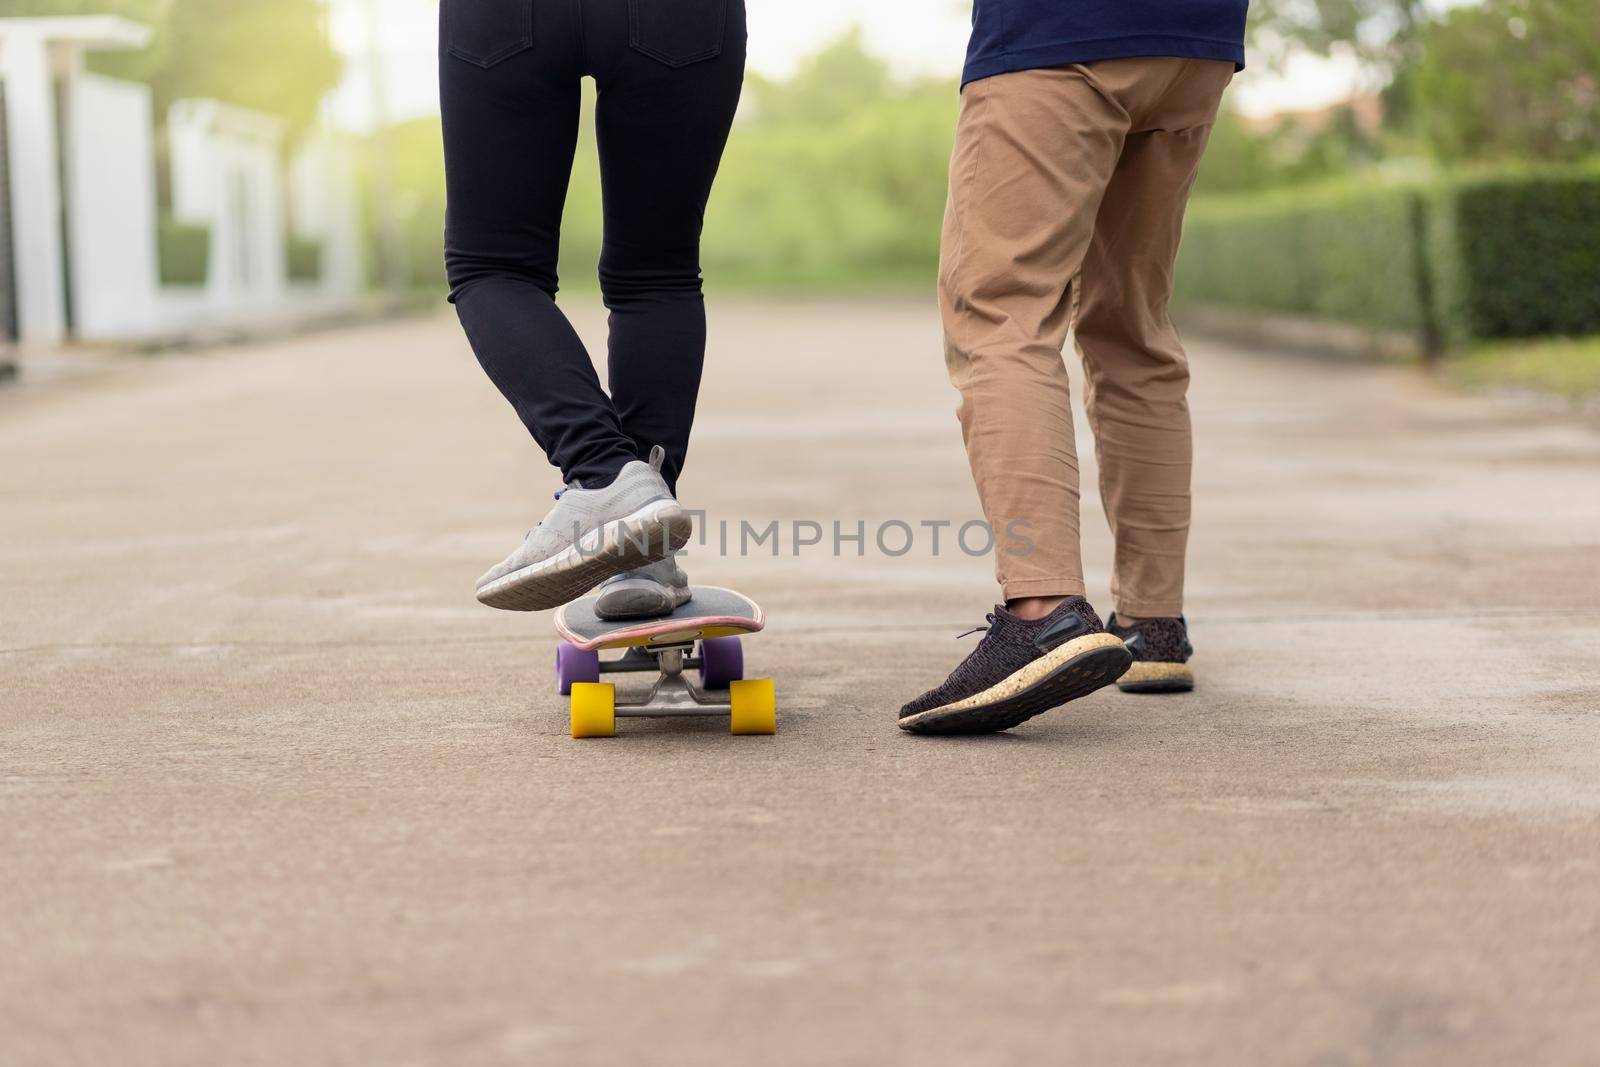 Woman practice on surfskate in park